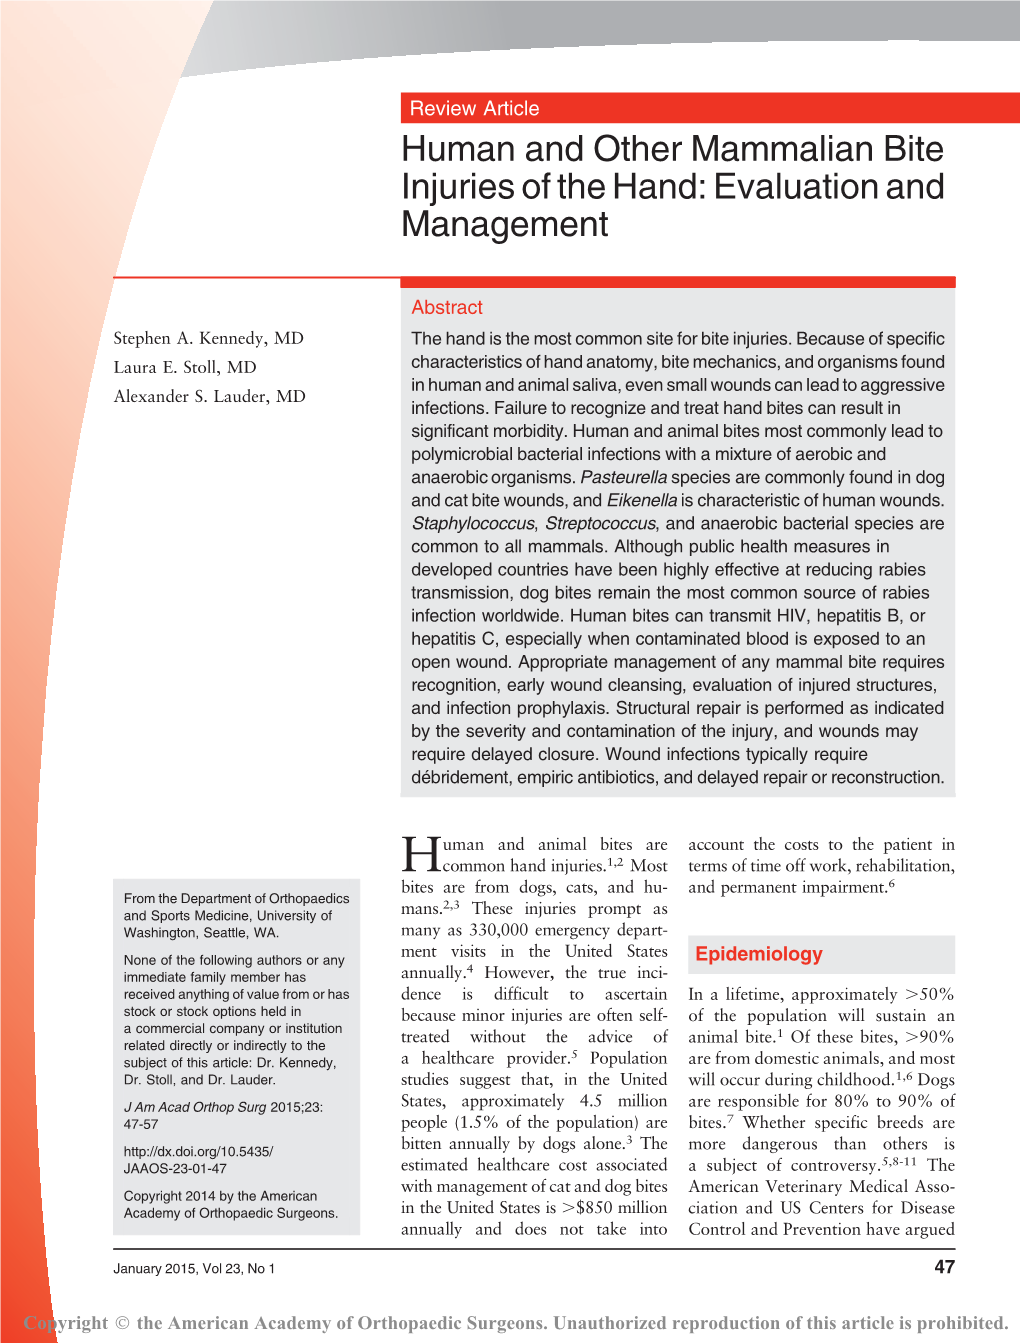 Human and Other Mammalian Bite Injuries of the Hand: Evaluation and Management